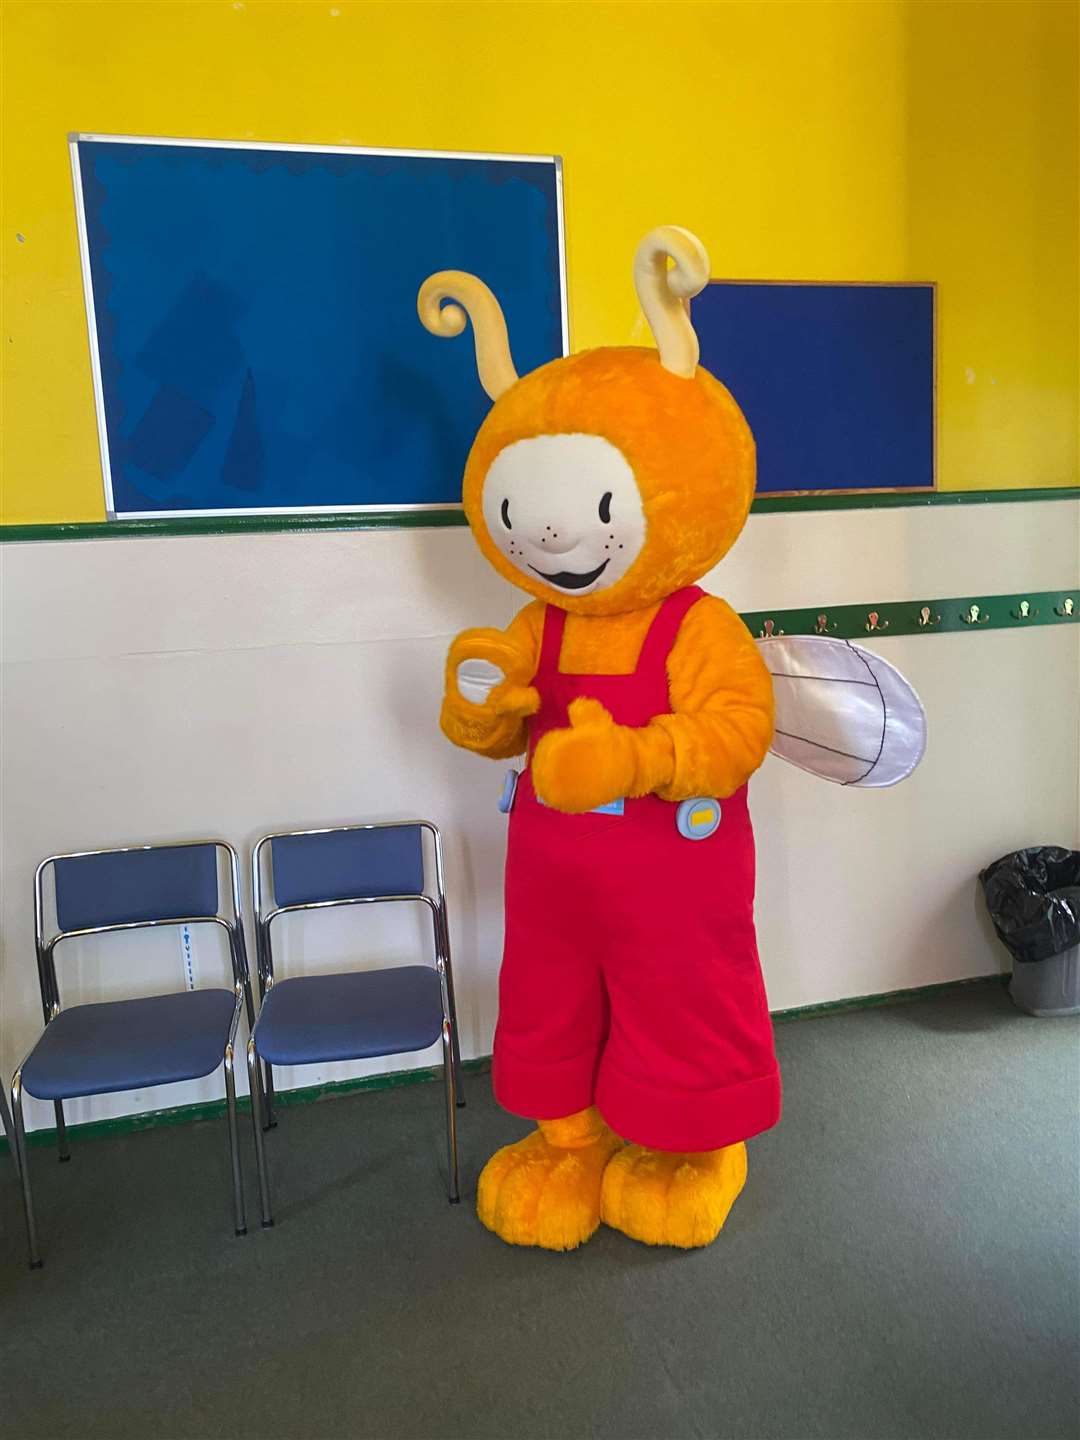 Bookbug made a special appearance at the family day.